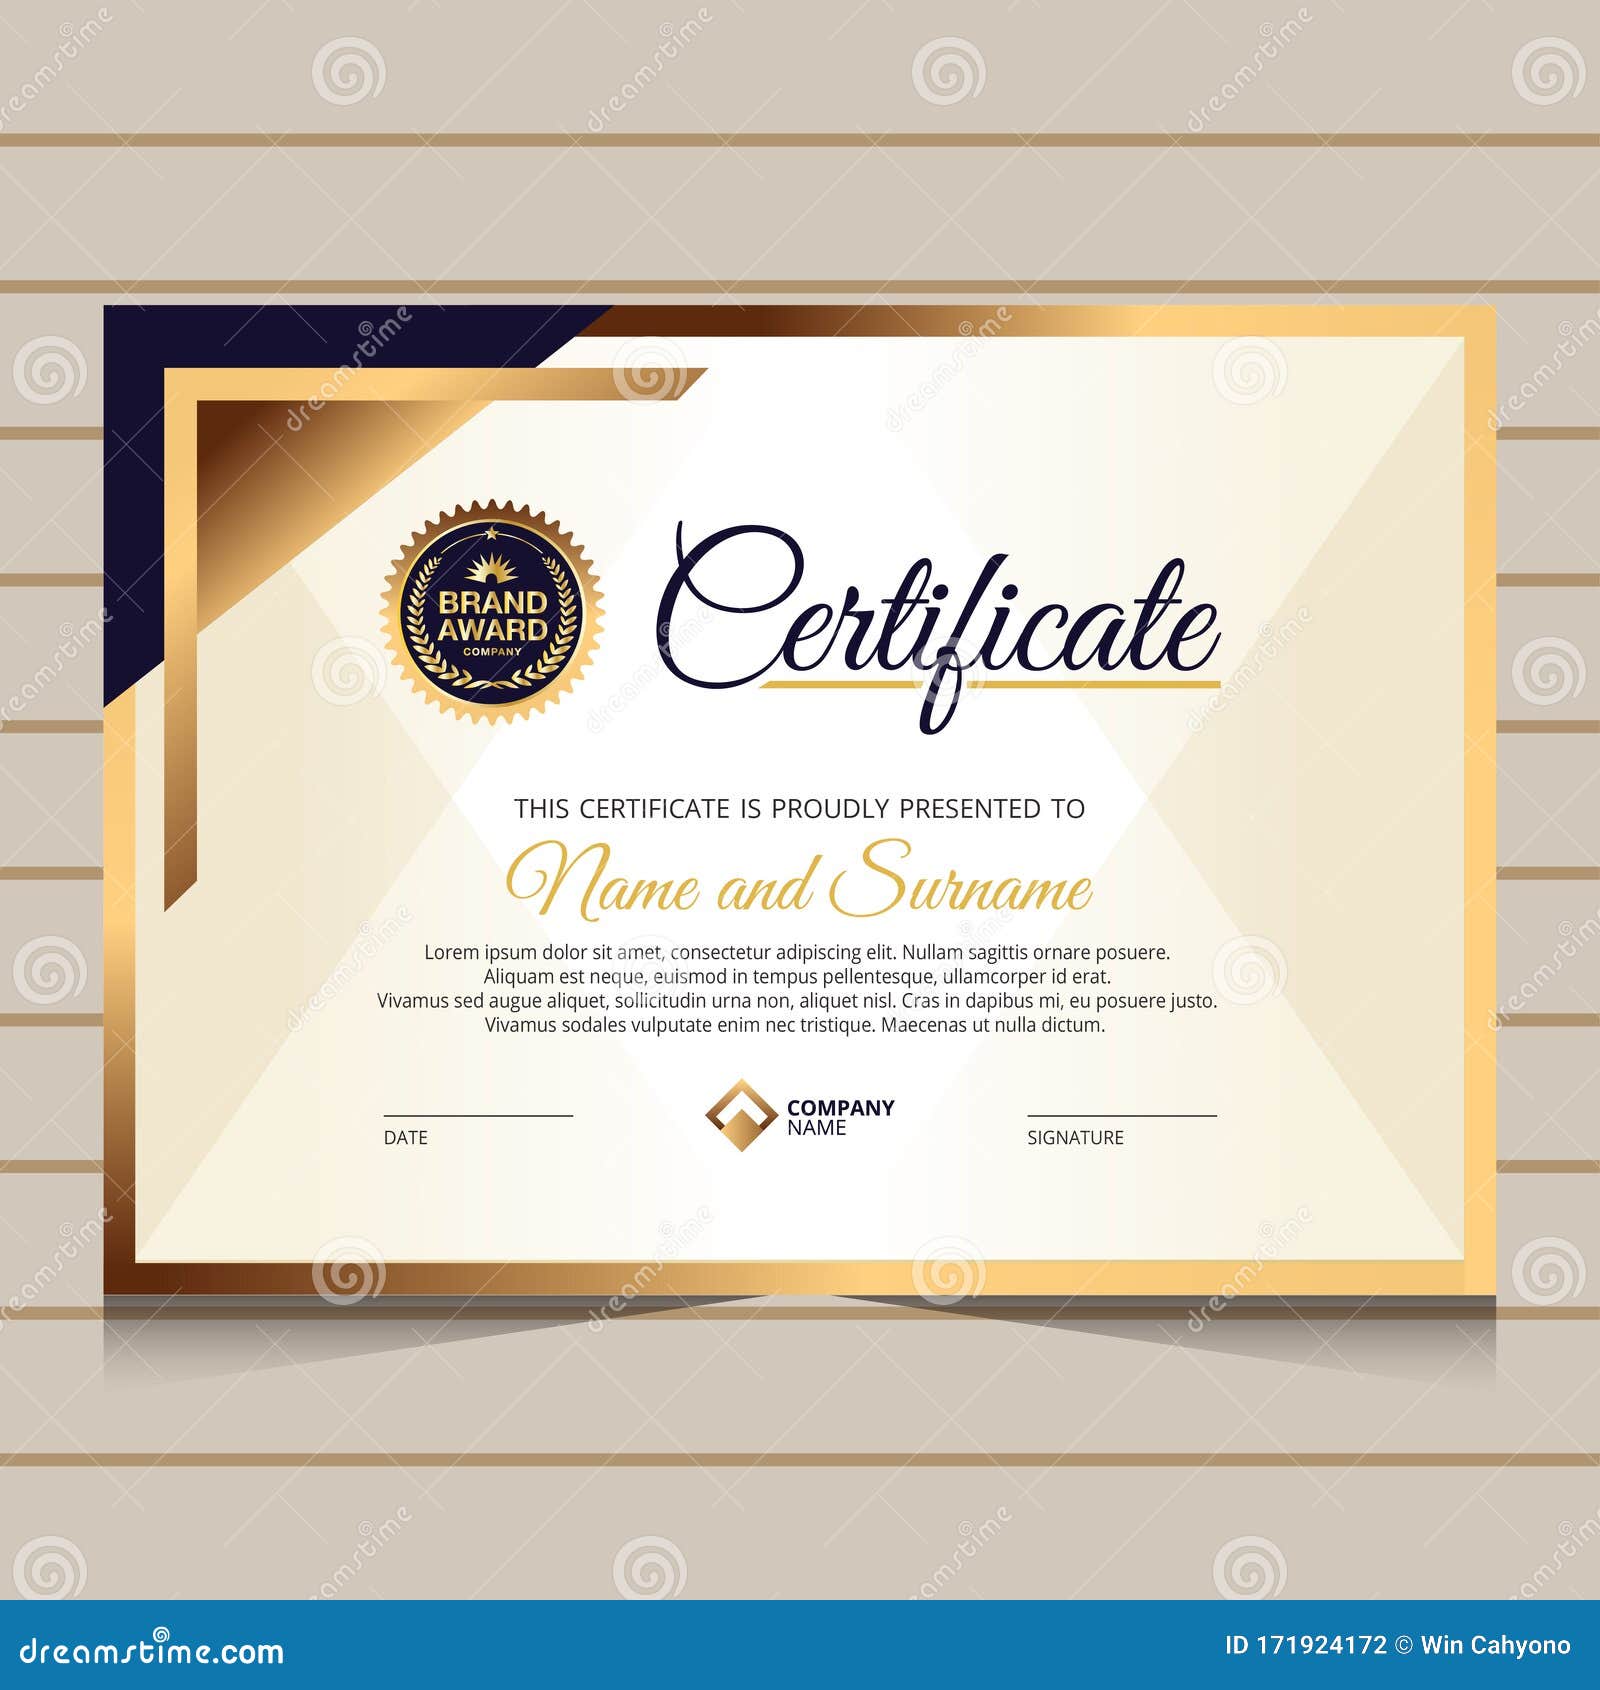 Graduation Certificate Template from thumbs.dreamstime.com